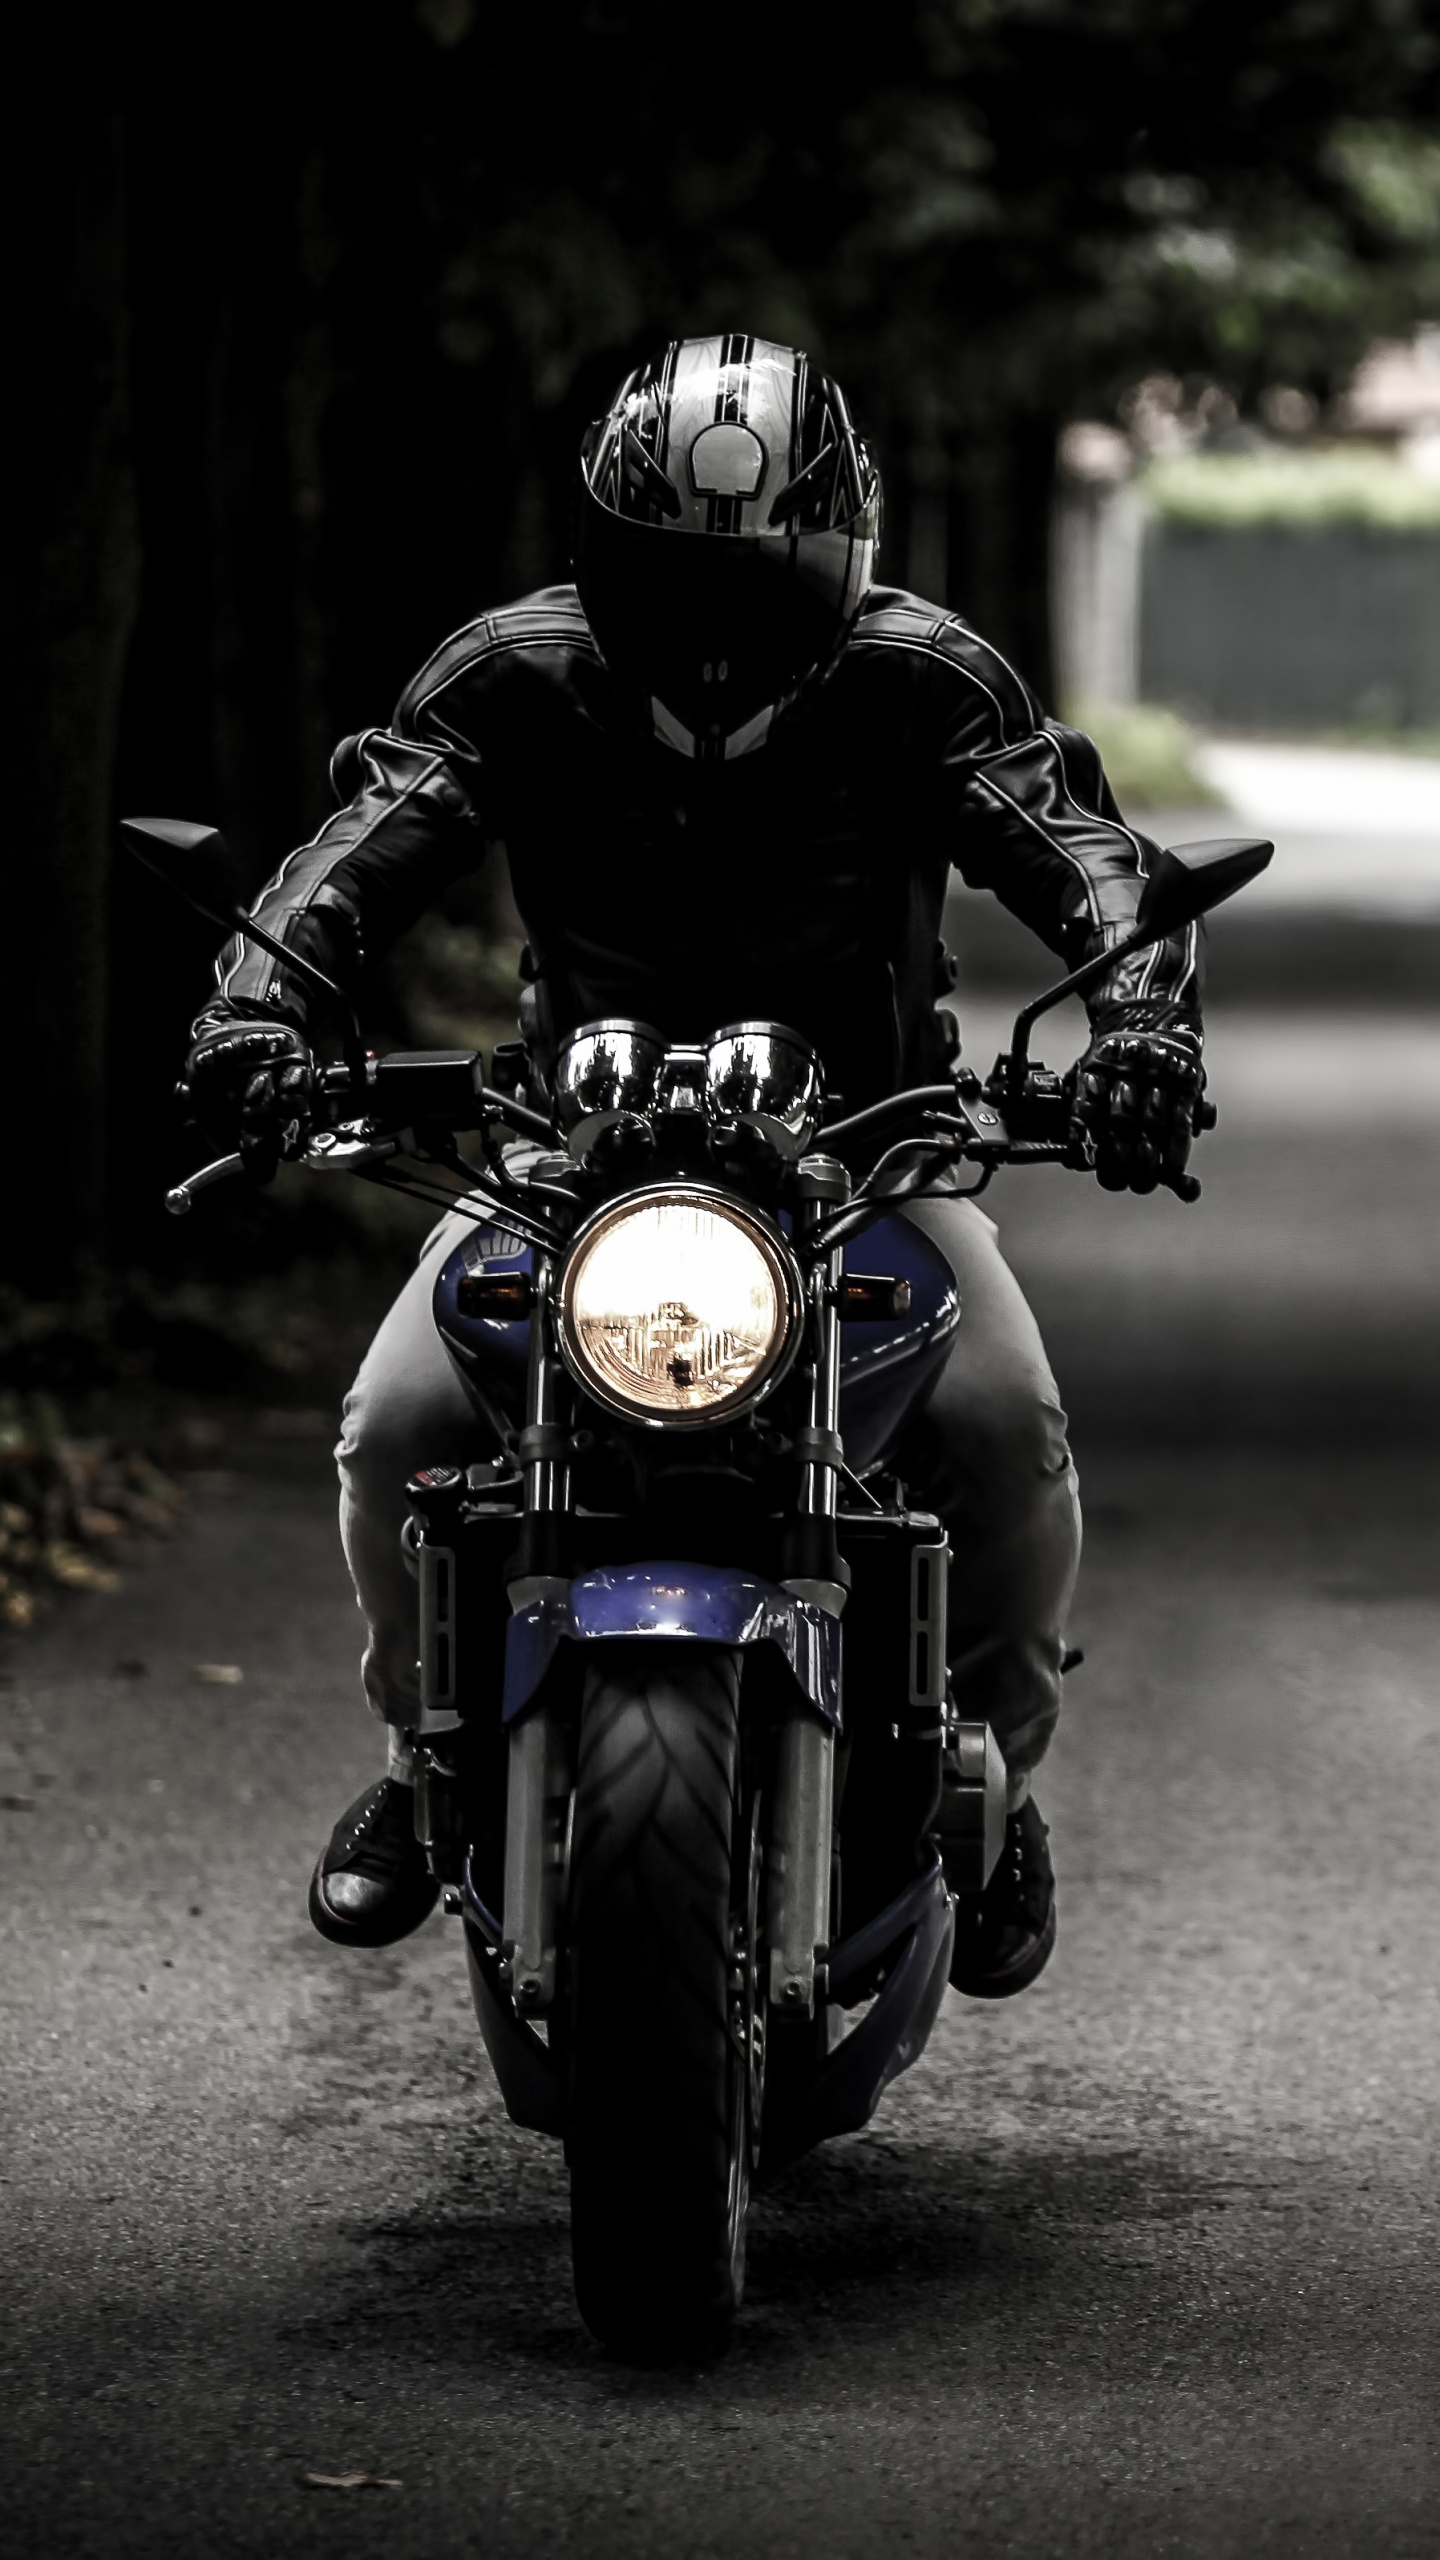 Man in Black Helmet Riding Motorcycle on Road During Daytime. Wallpaper in 1440x2560 Resolution